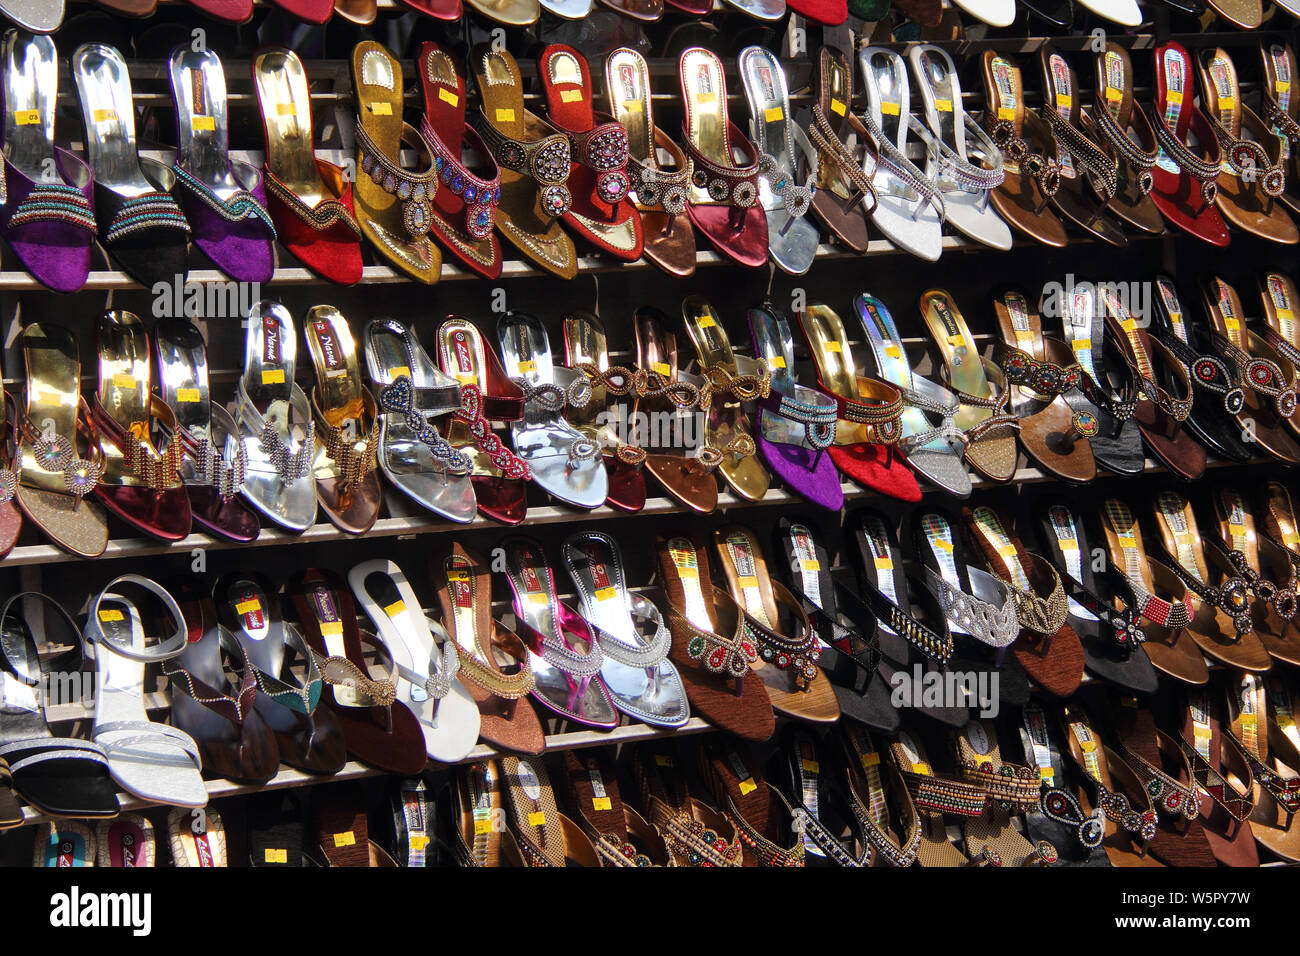 Ladies footwear at a market stall Stock Photo - Alamy